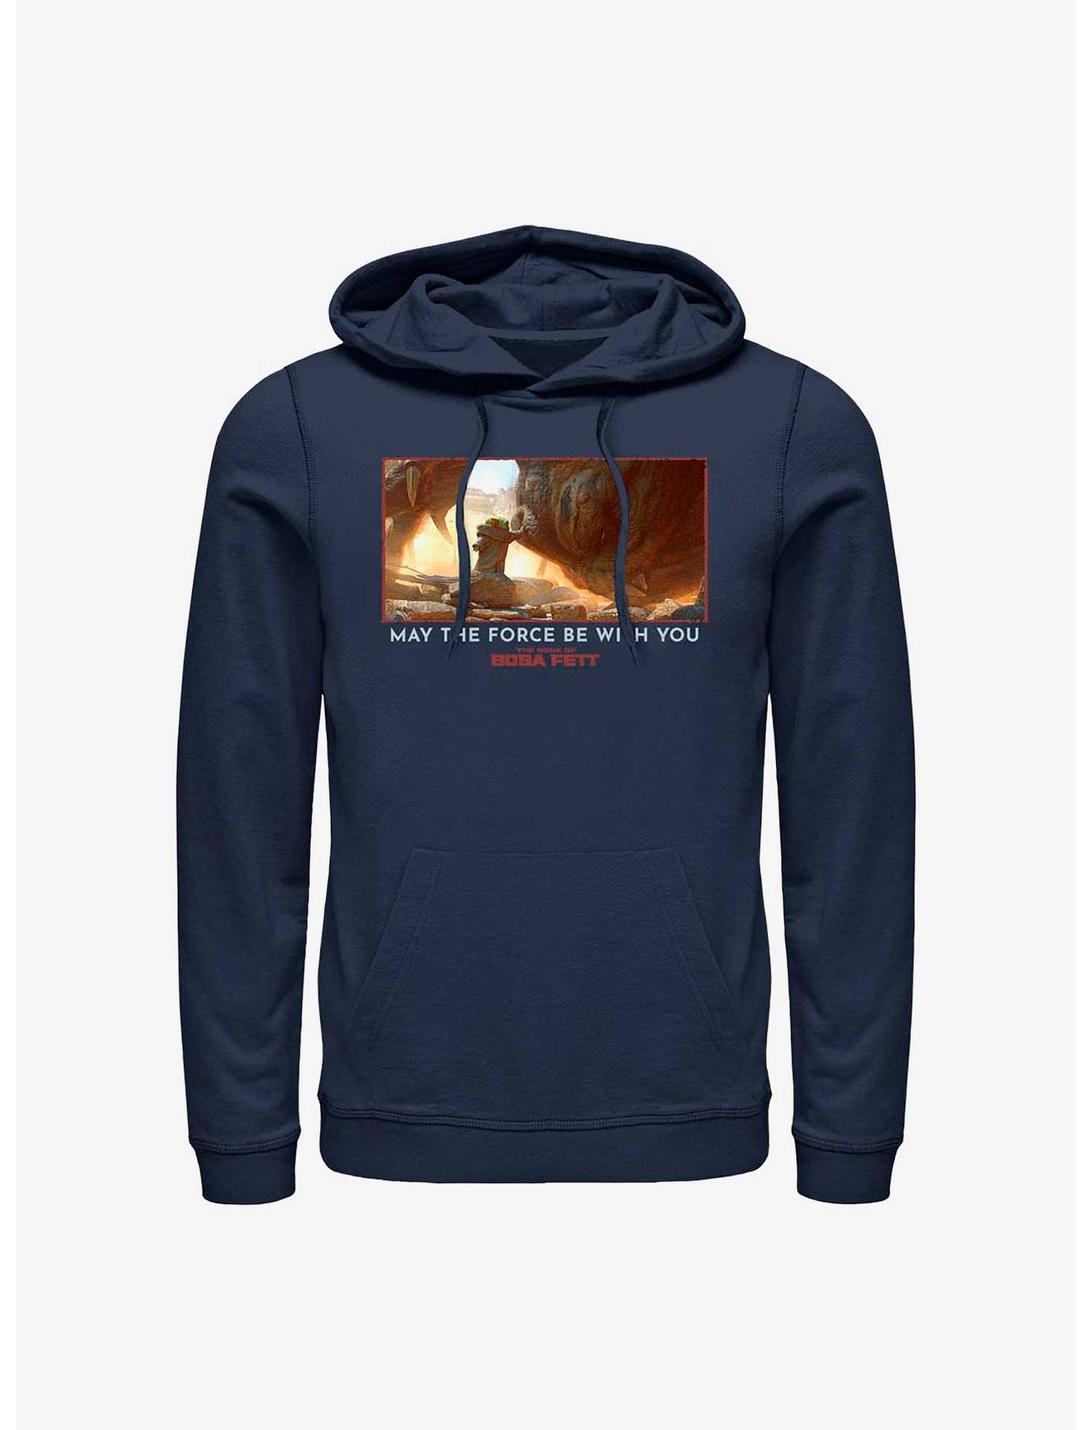 Star Wars Book Of Boba Fett The Child & Rancor May The Force Be With You Hoodie, NAVY, hi-res